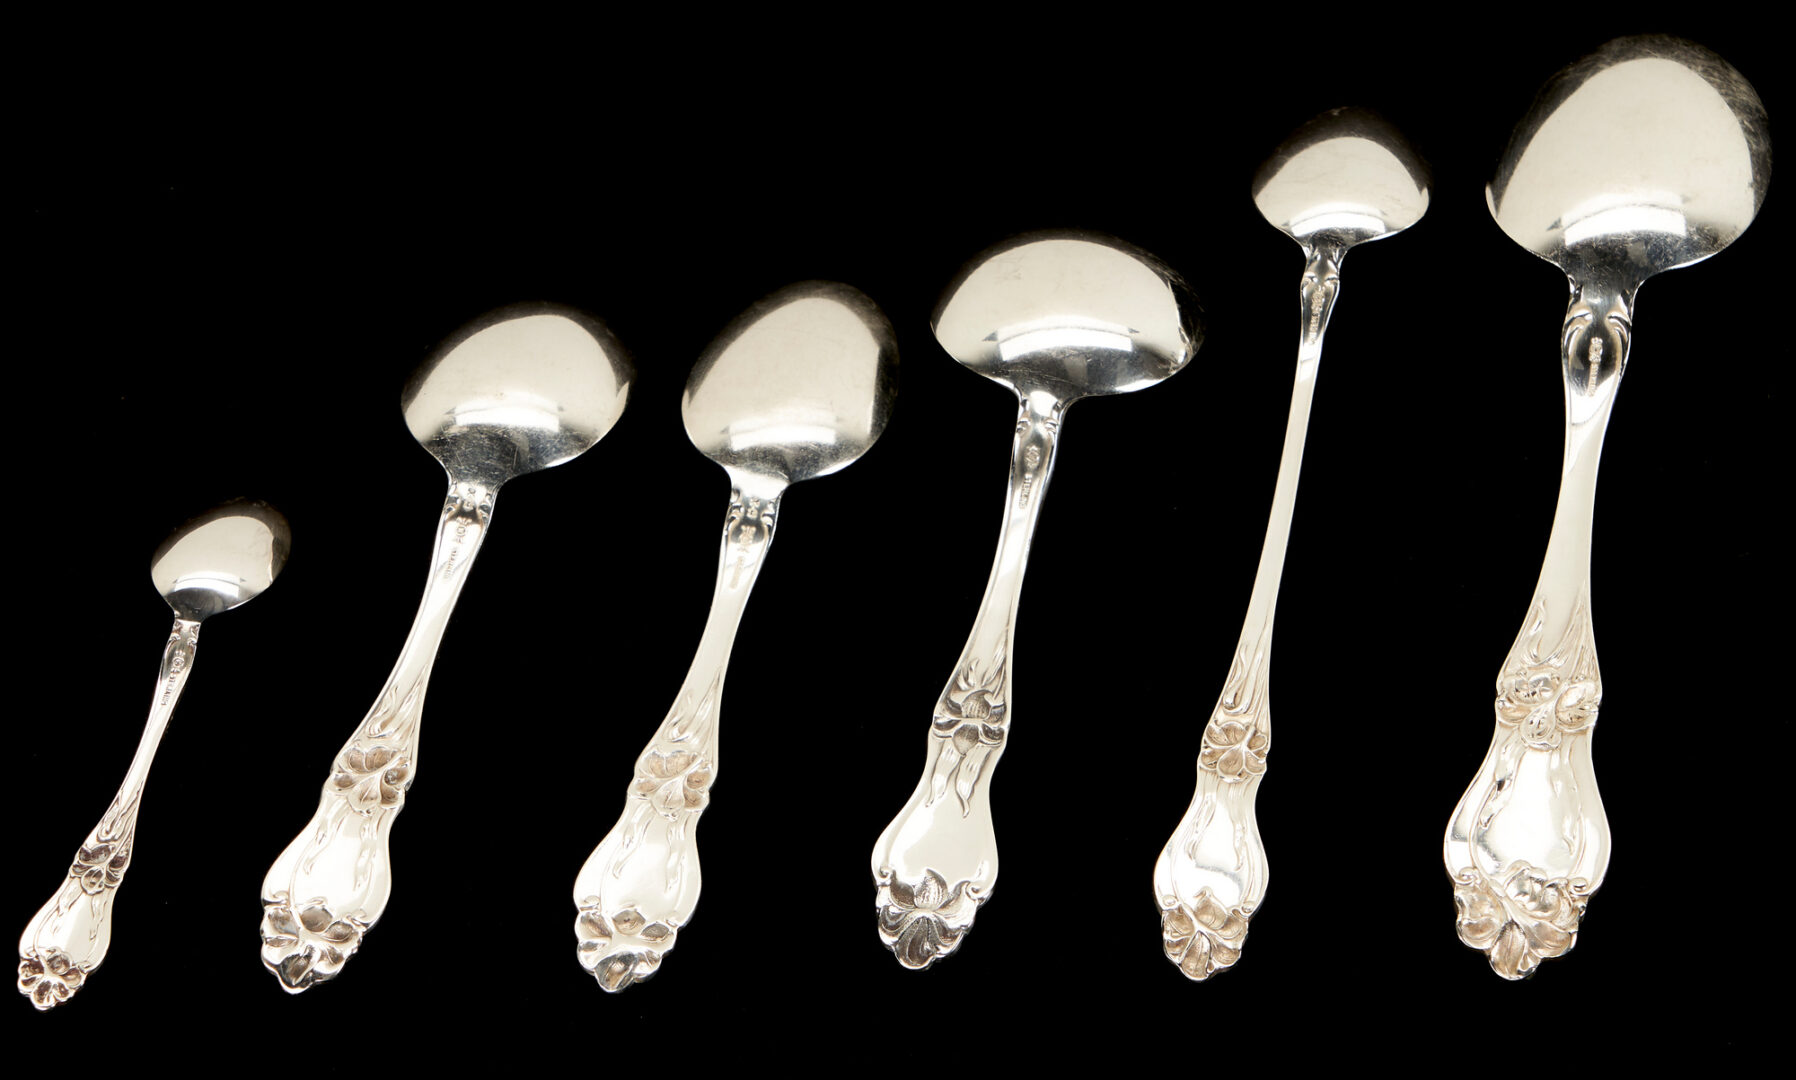 Lot 80: Whiting Lily Pattern Sterling Silver Flatware, 86 pcs.